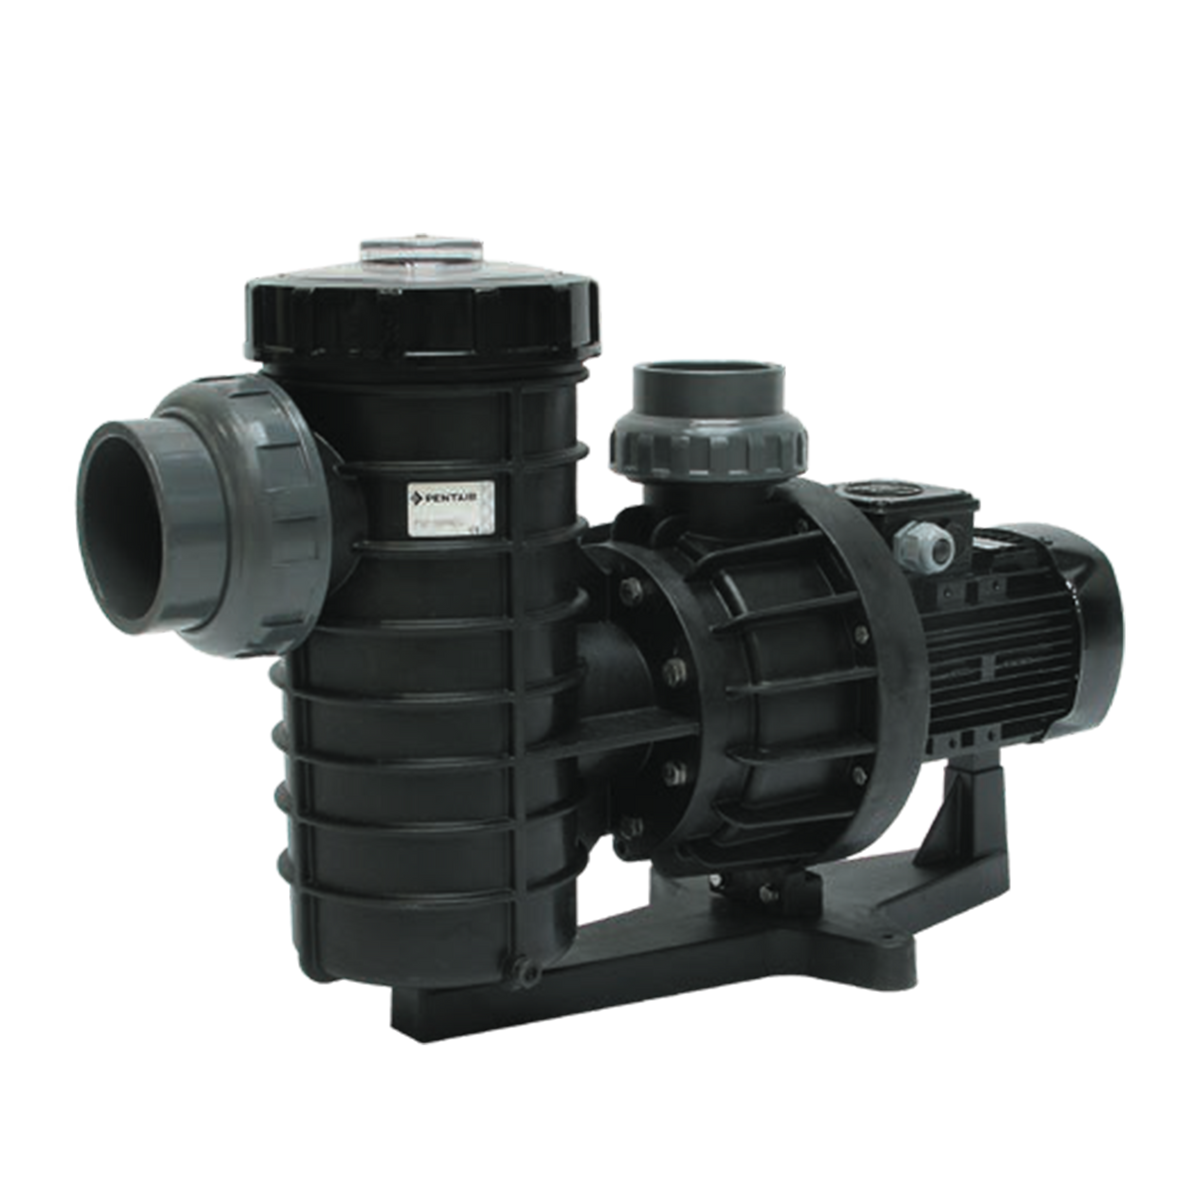 5PSP Series Commercial High Performance Pool Pumps